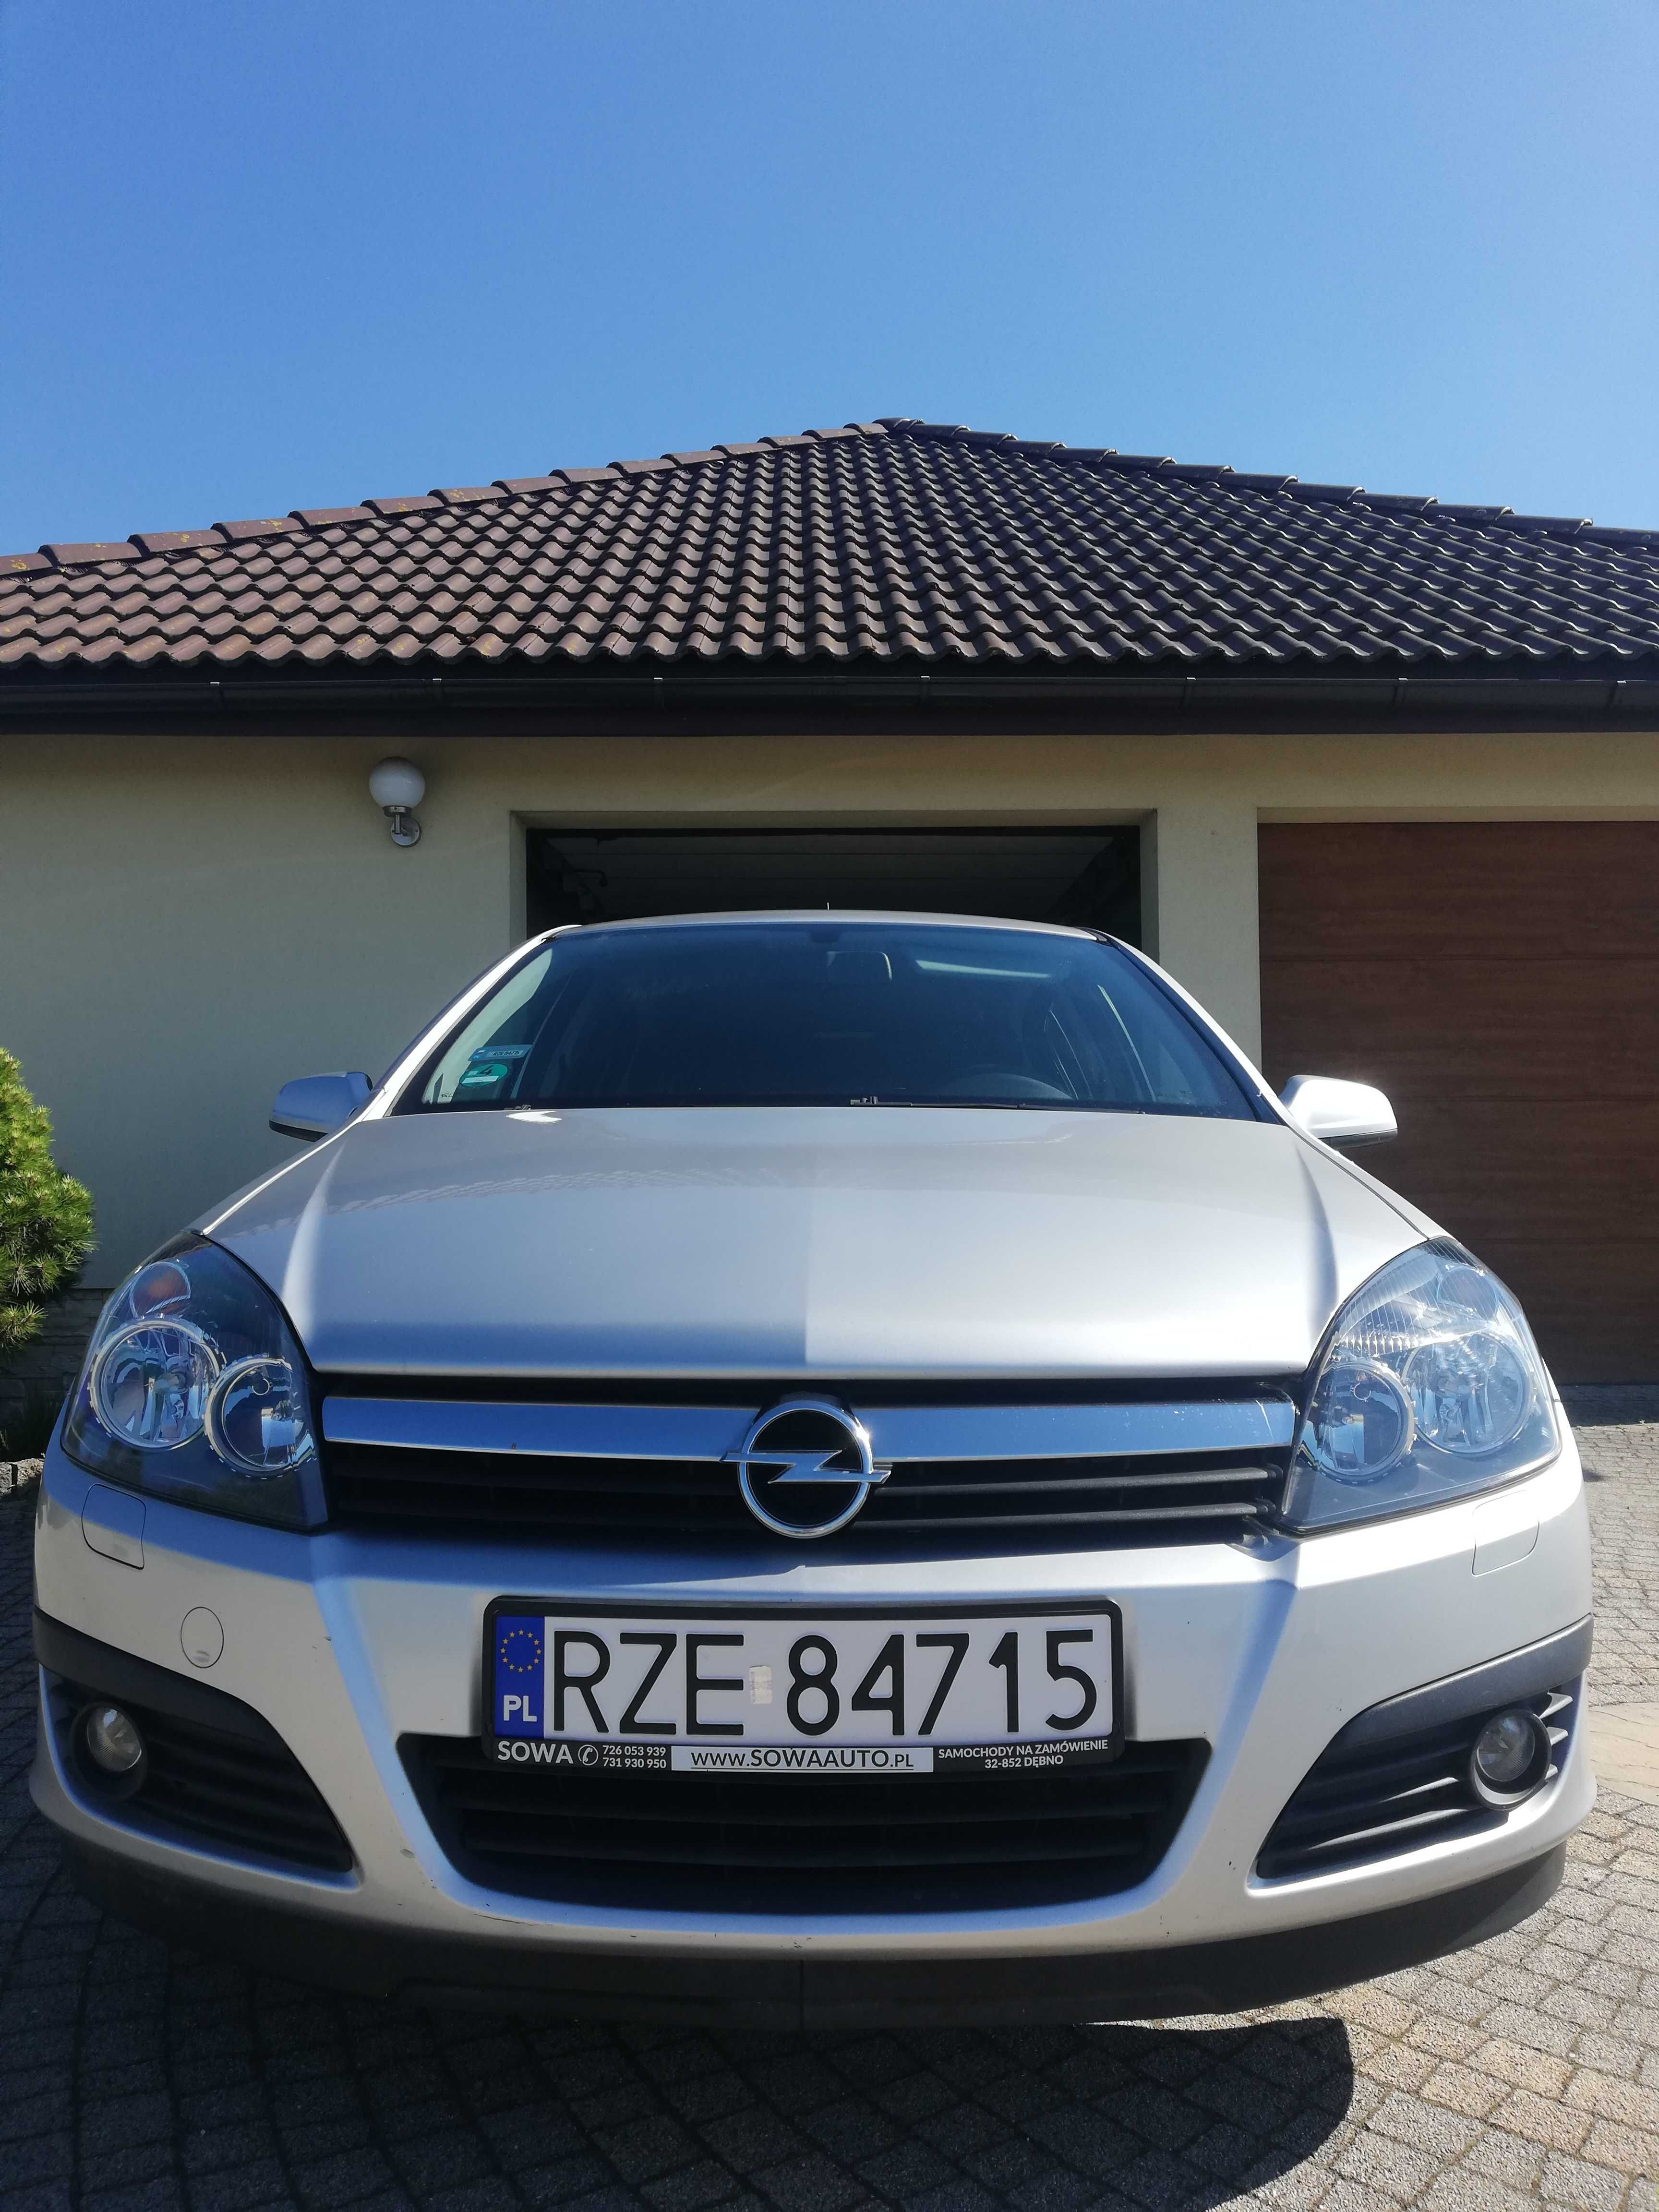 Opel Astra H 1.6 twinport